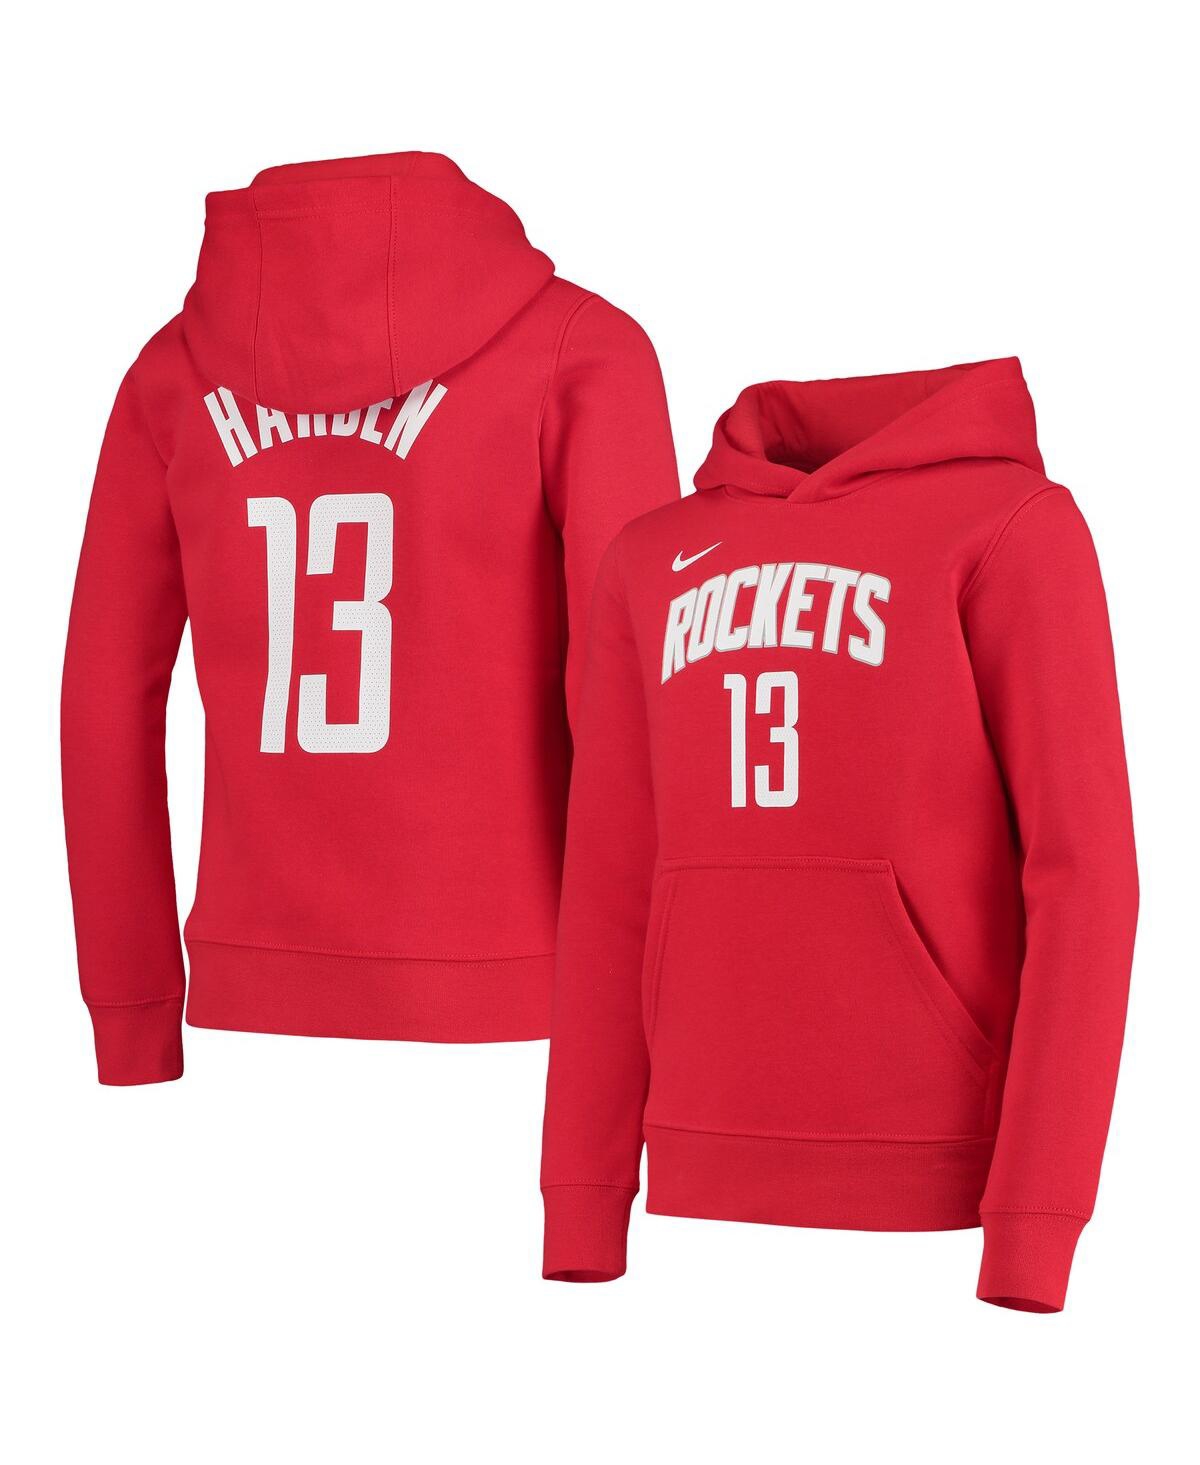 Boys Youth Nike James Harden Red Houston Rockets Name and Number Pullover Hoodie